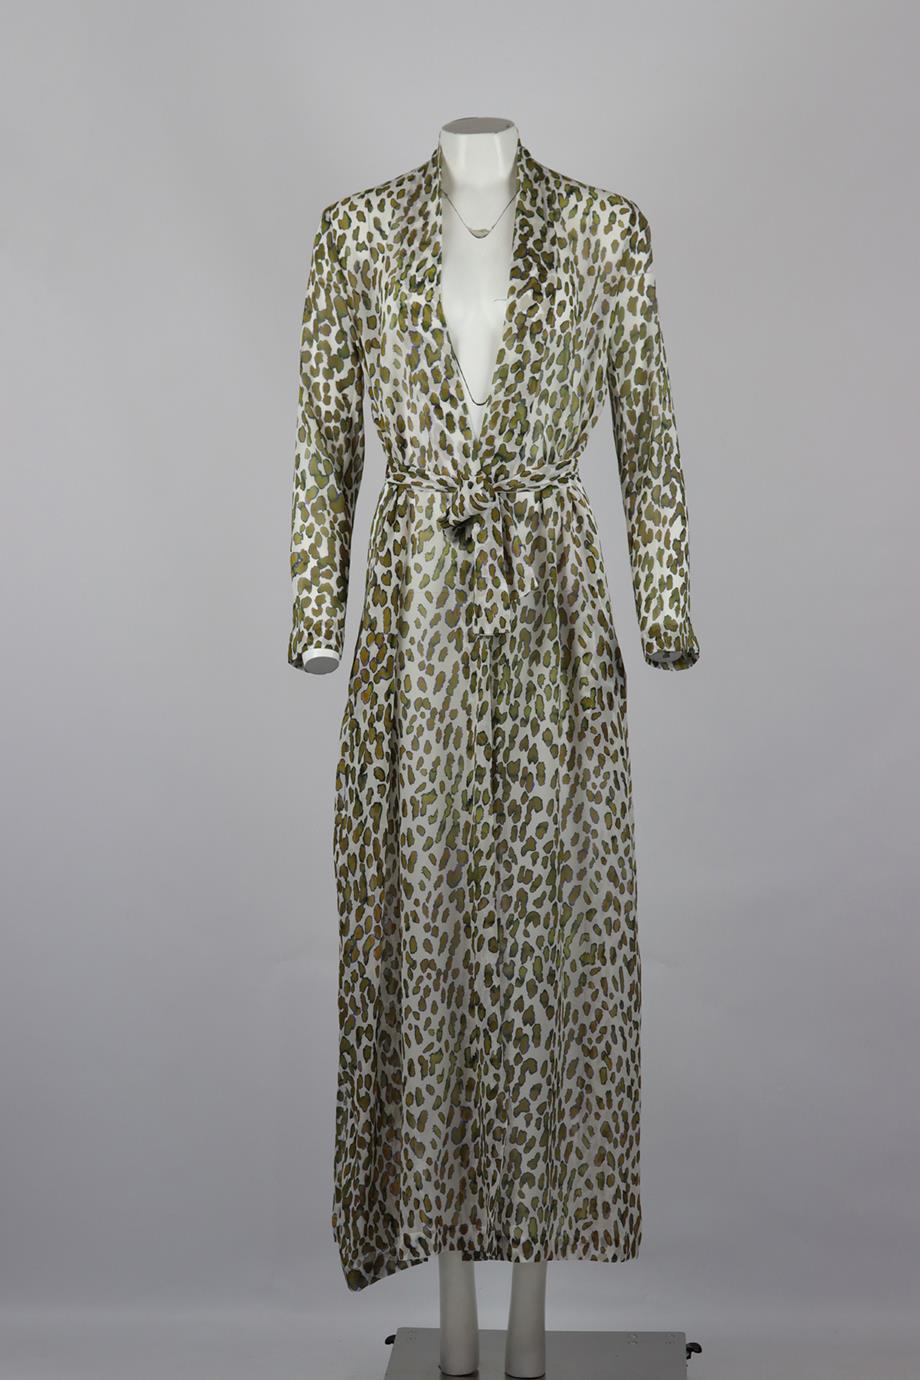 ON THE ISLAND BELTED PRINTED SILK ROBE IT 40 UK 8